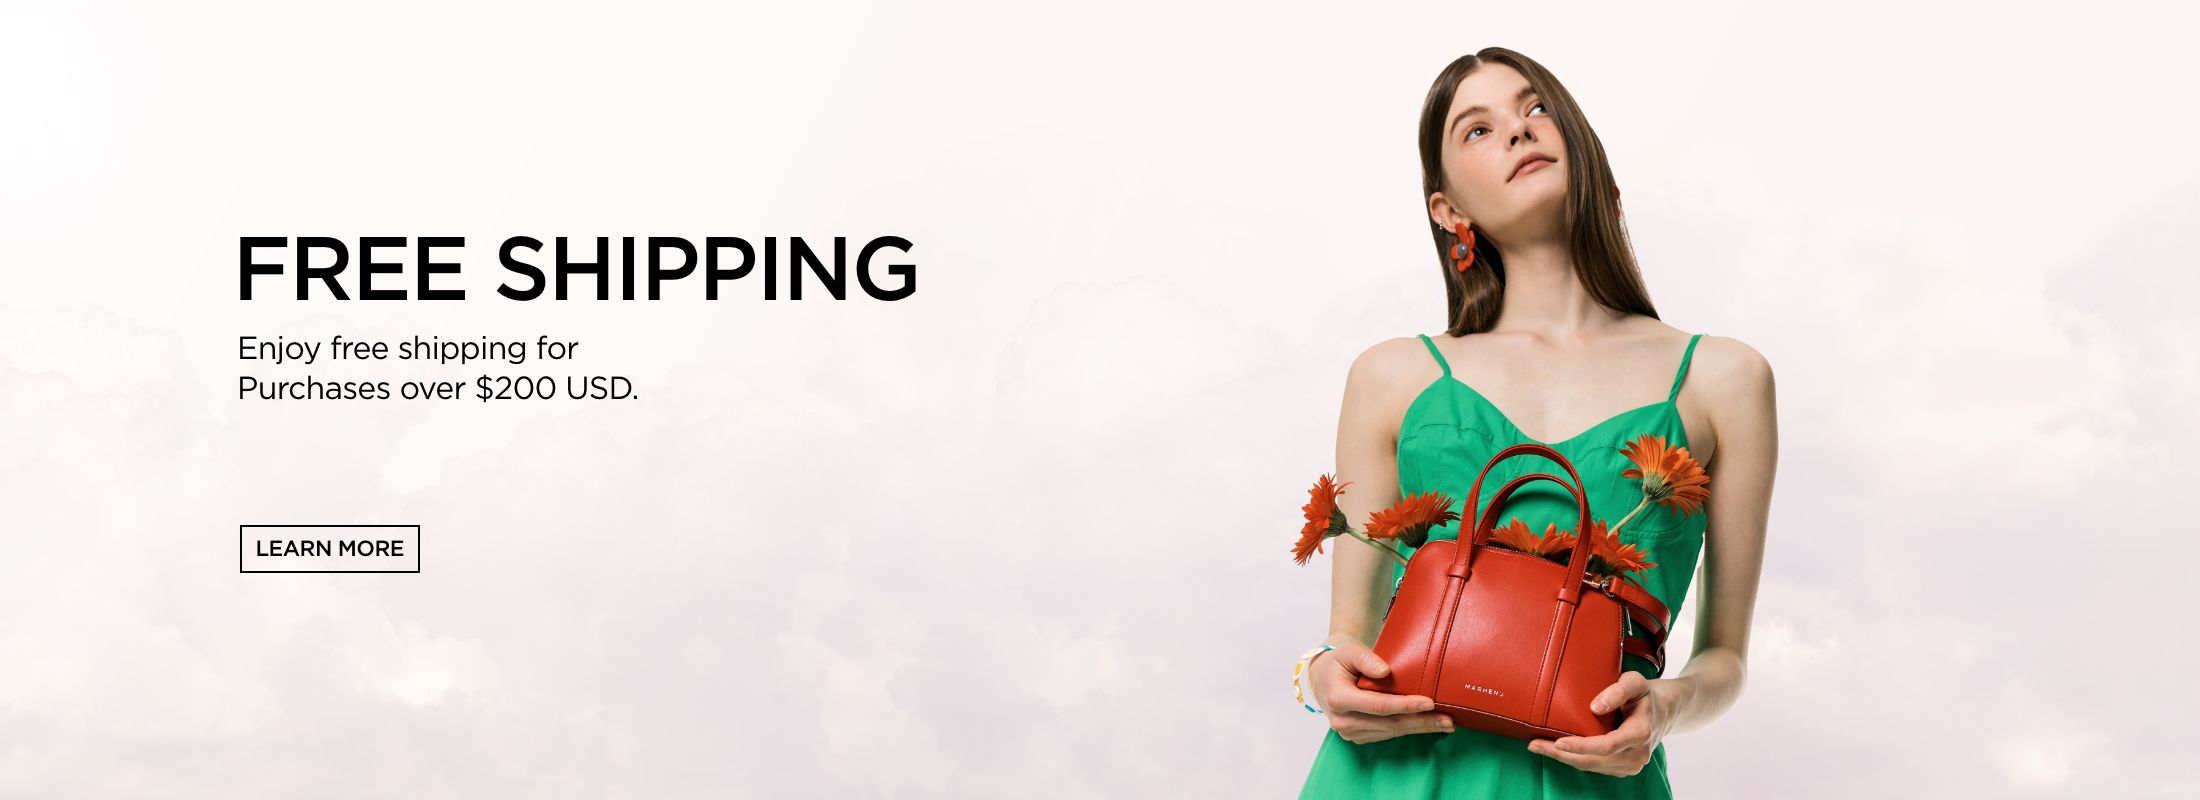 Enjoy free shipping for Purchases over $200 USD